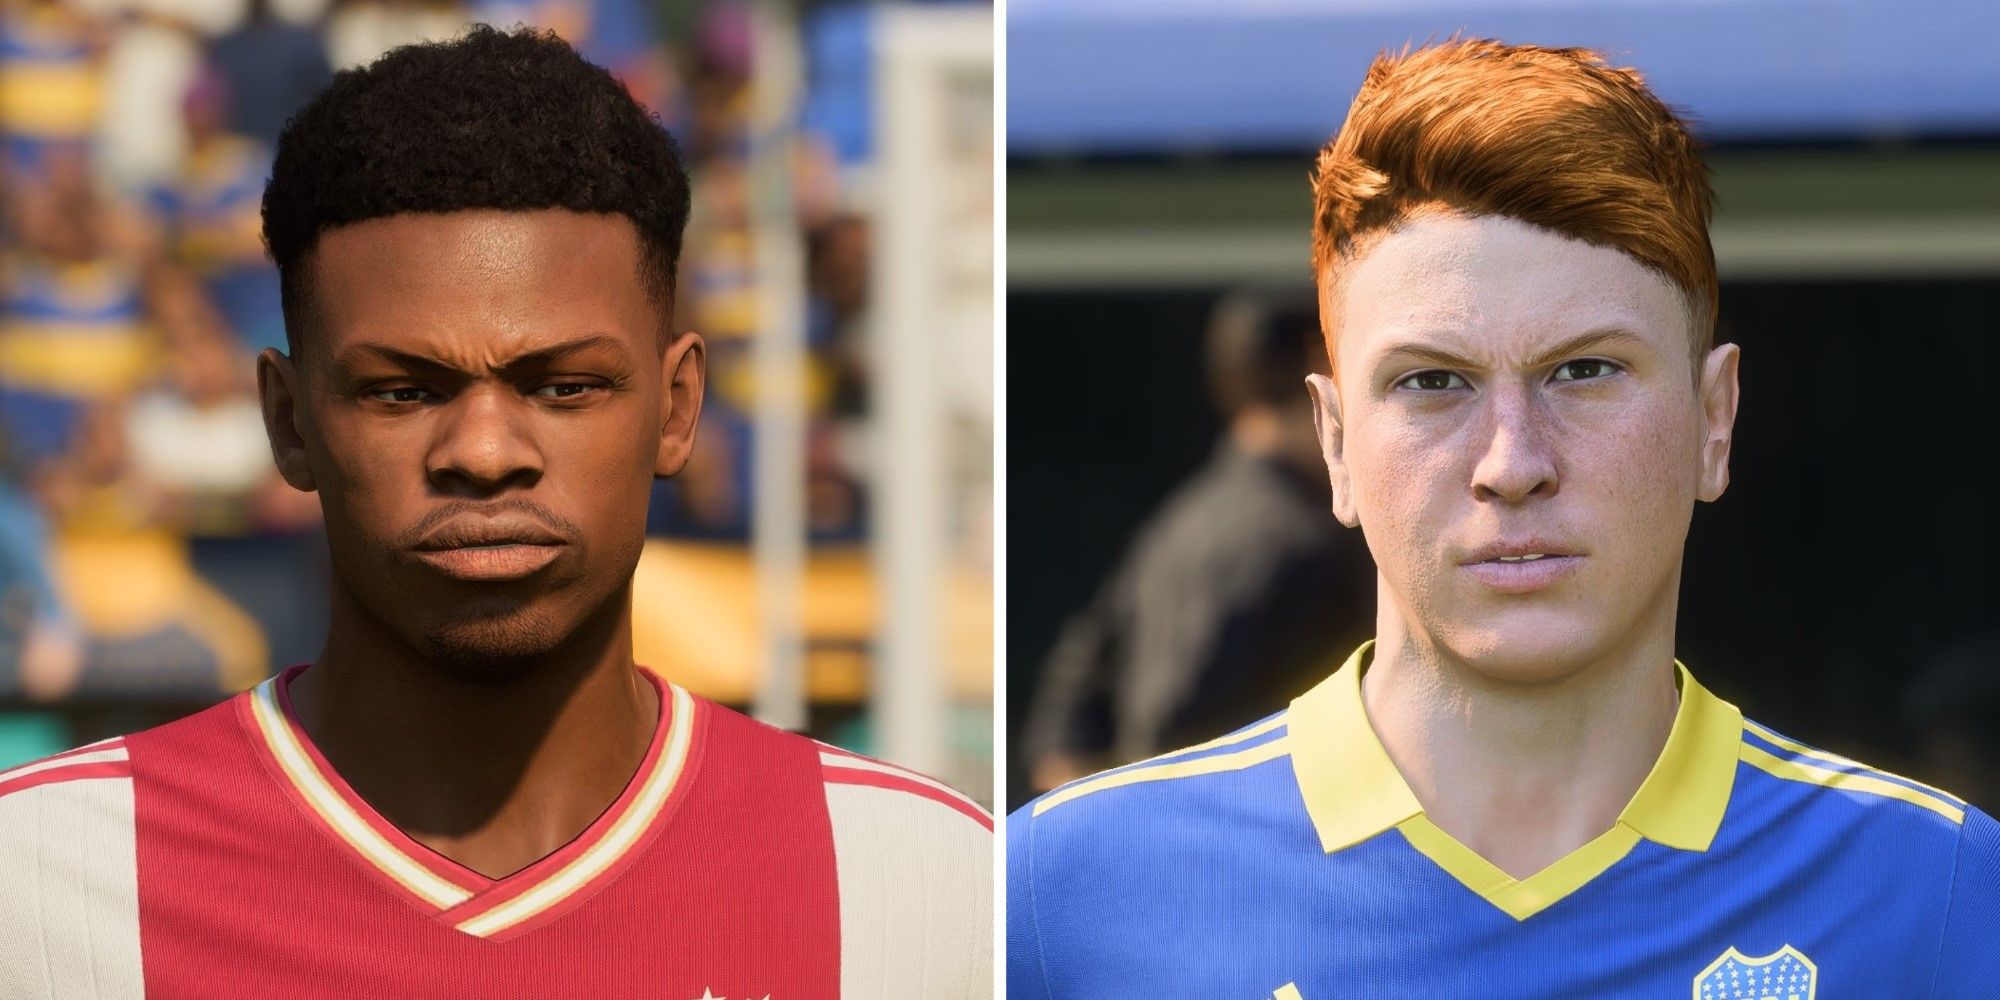 An image of Jorrel Hato and Valetin Barco in FIFA 23